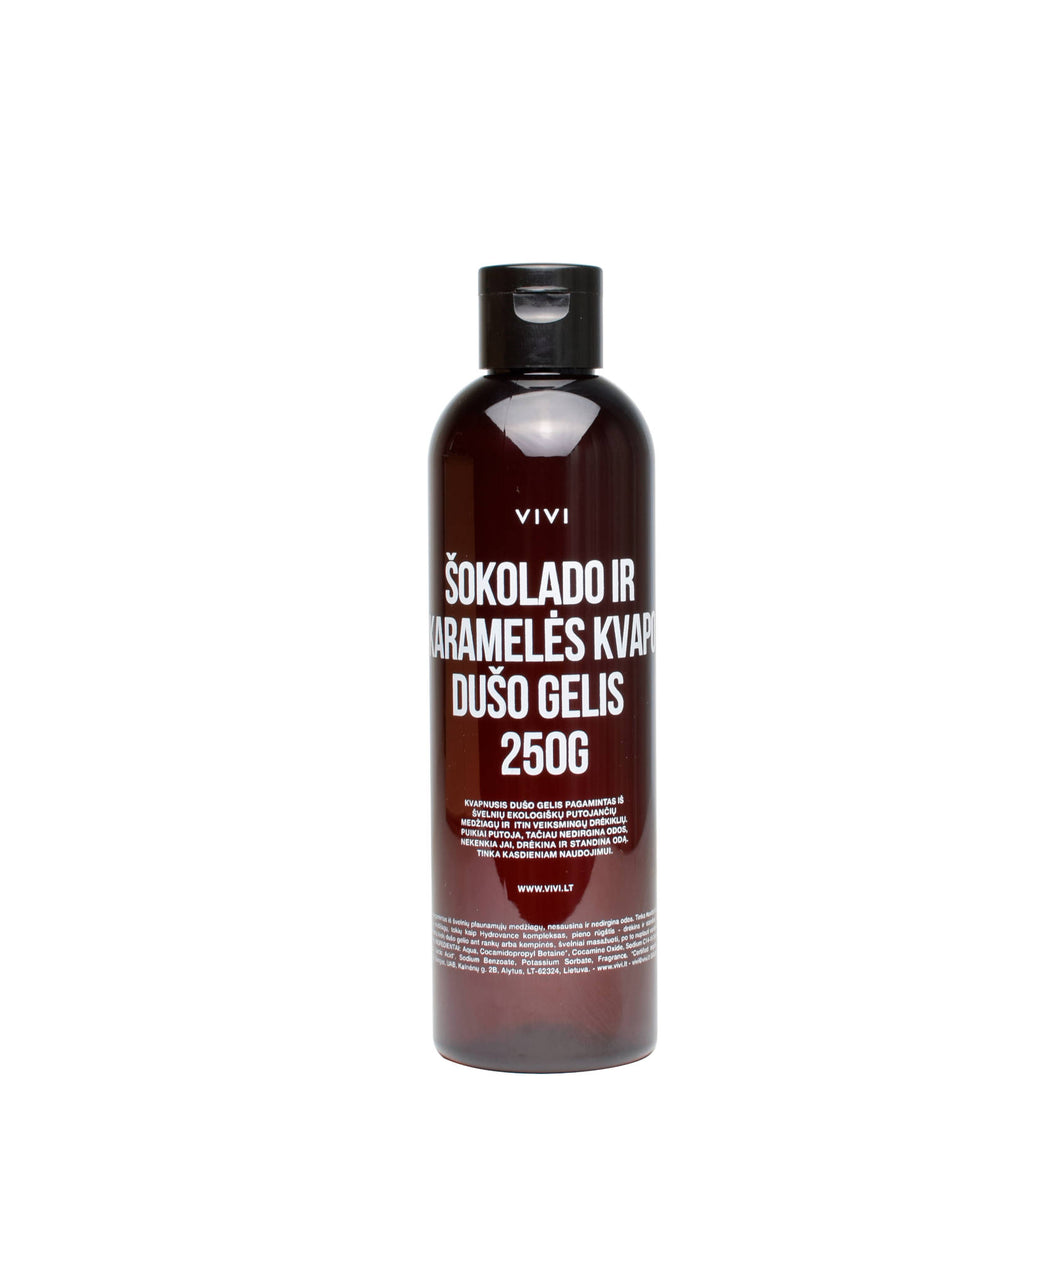 Chocolate and Caramel Scented Shower Gel, 250g